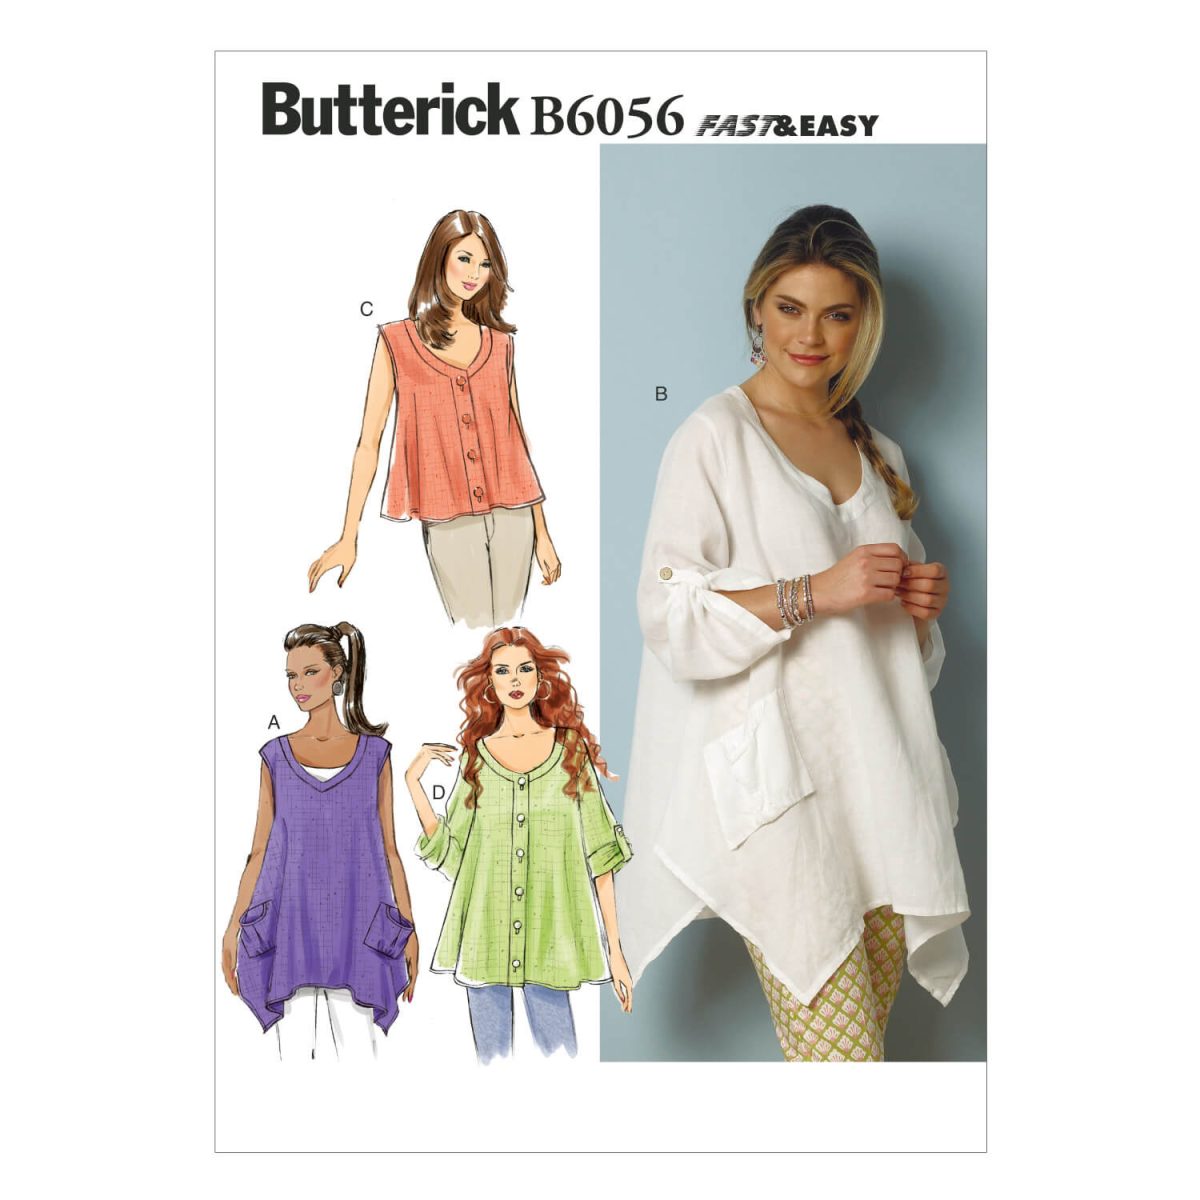 Butterick Sewing Pattern B6056 Misses' Top